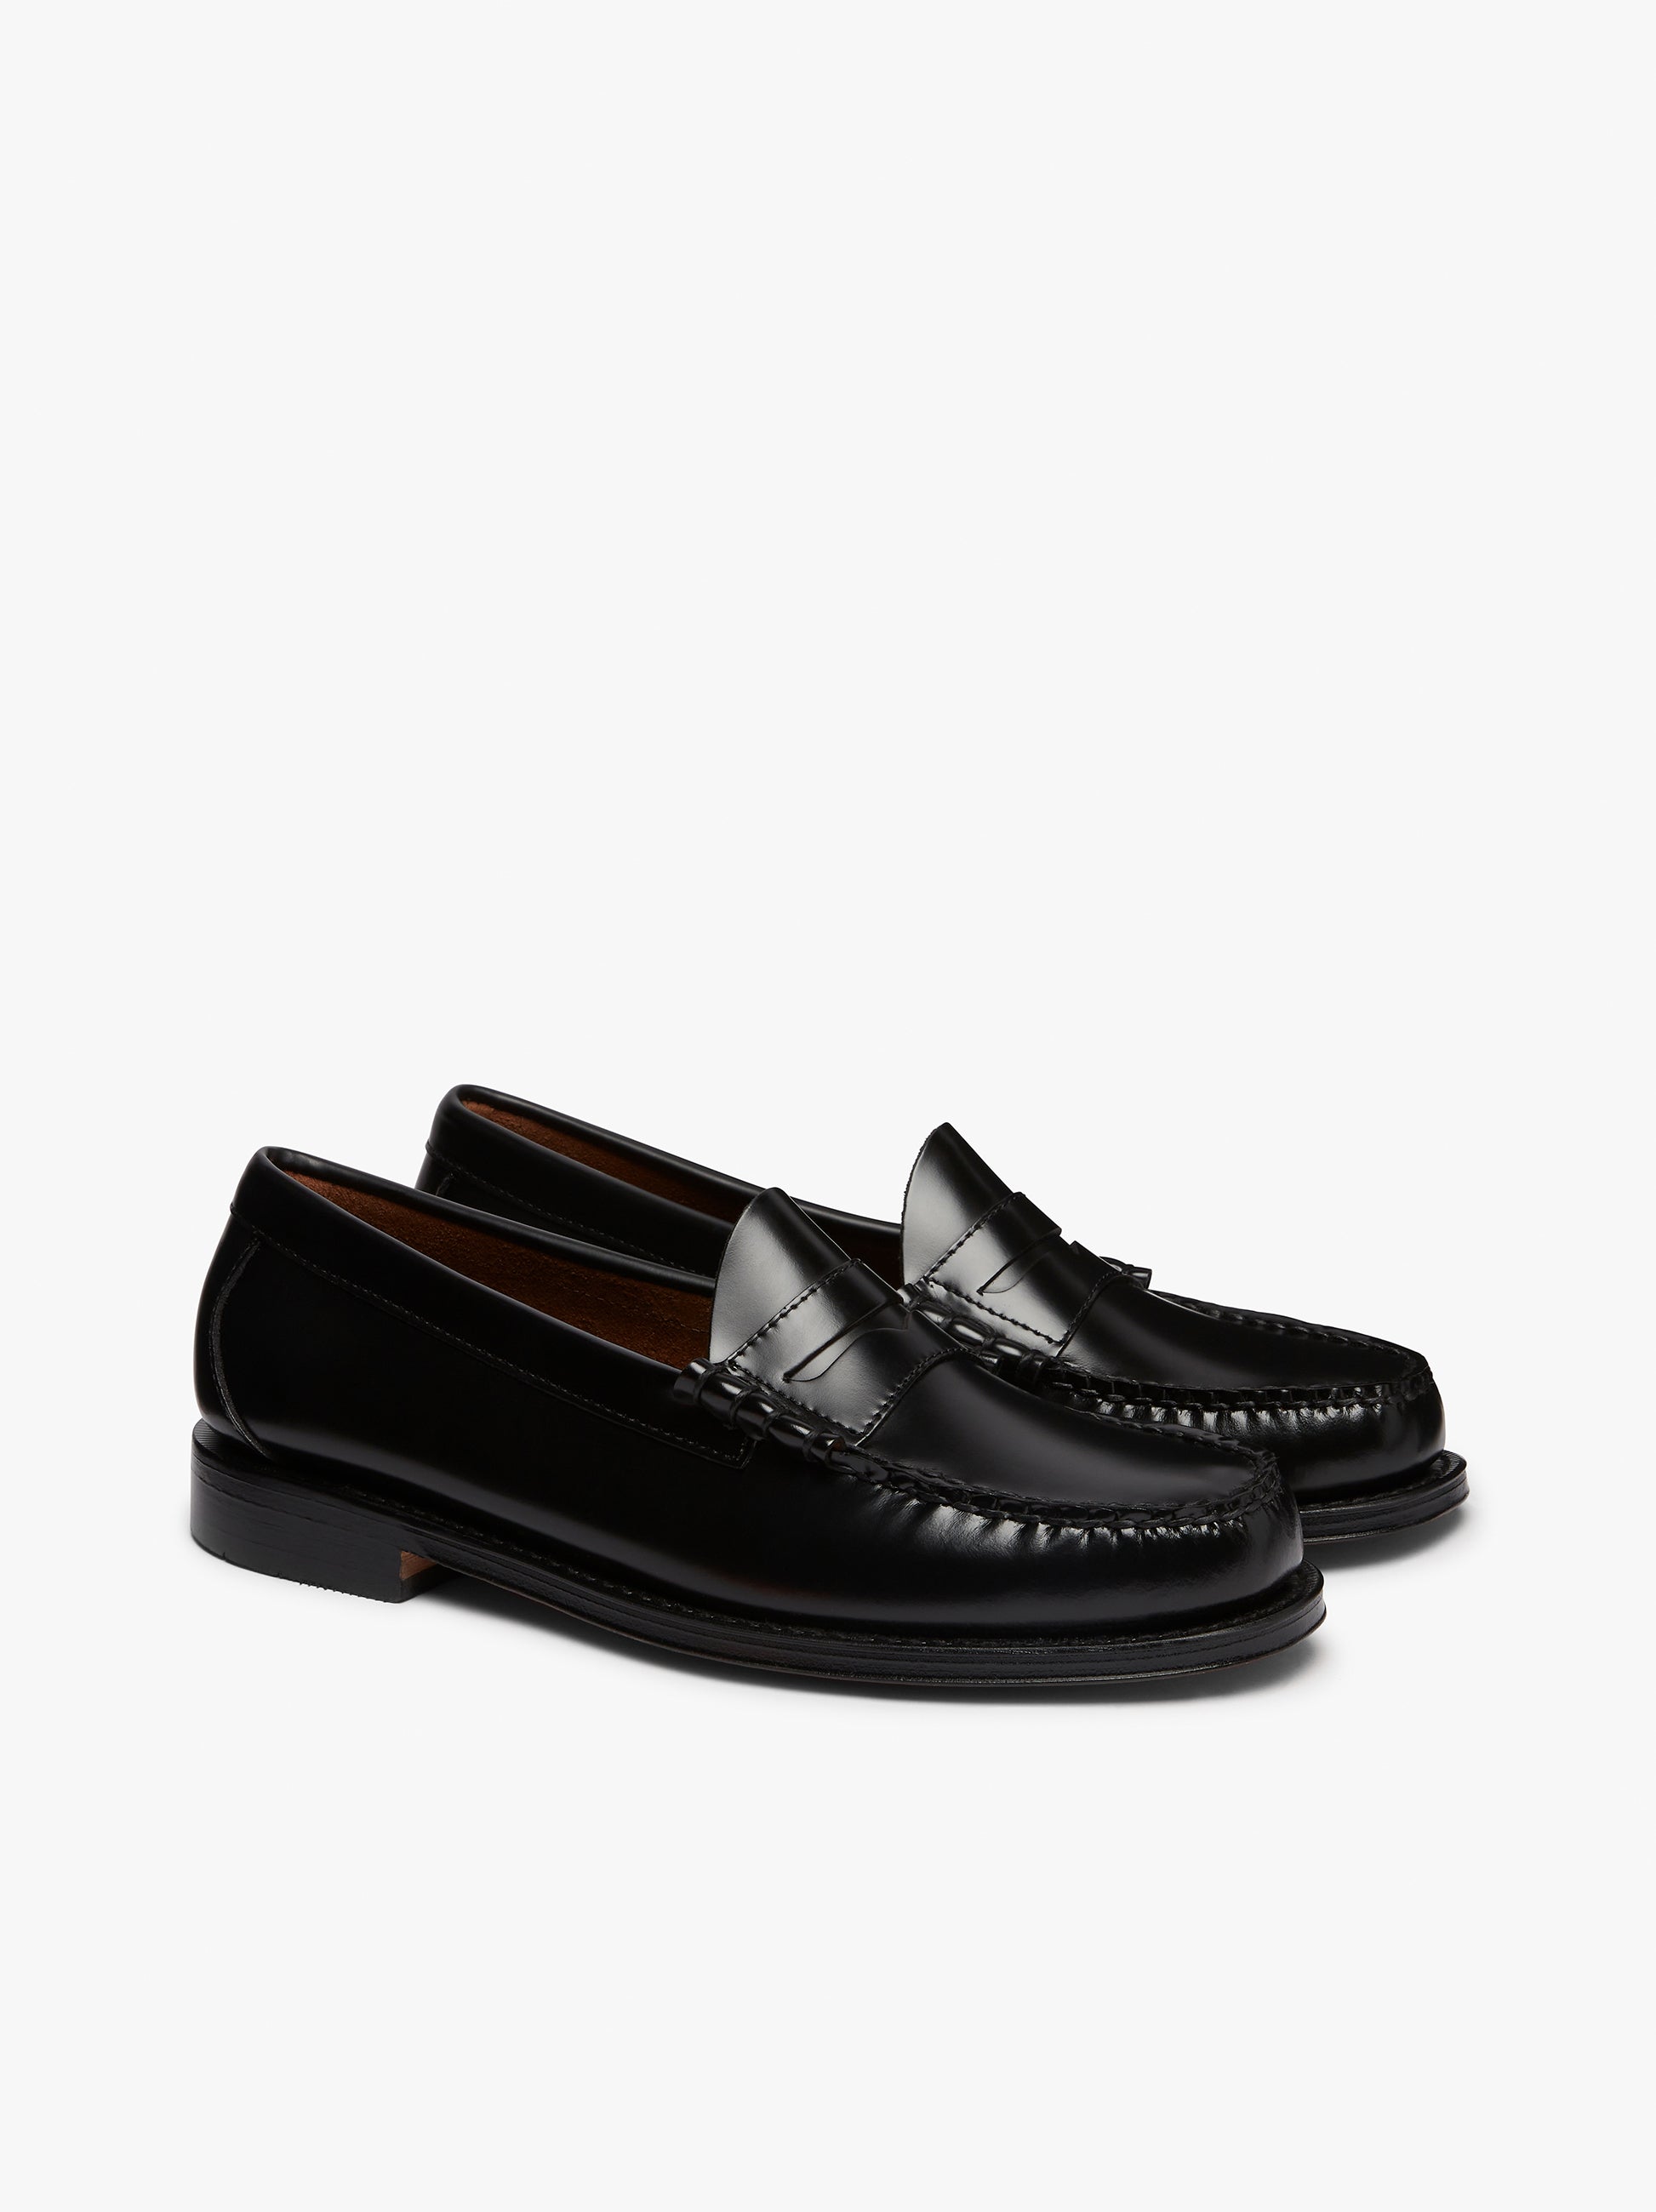 Black Leather Loafer Shoes Mens | Bass Weejuns Larson – G.H.BASS